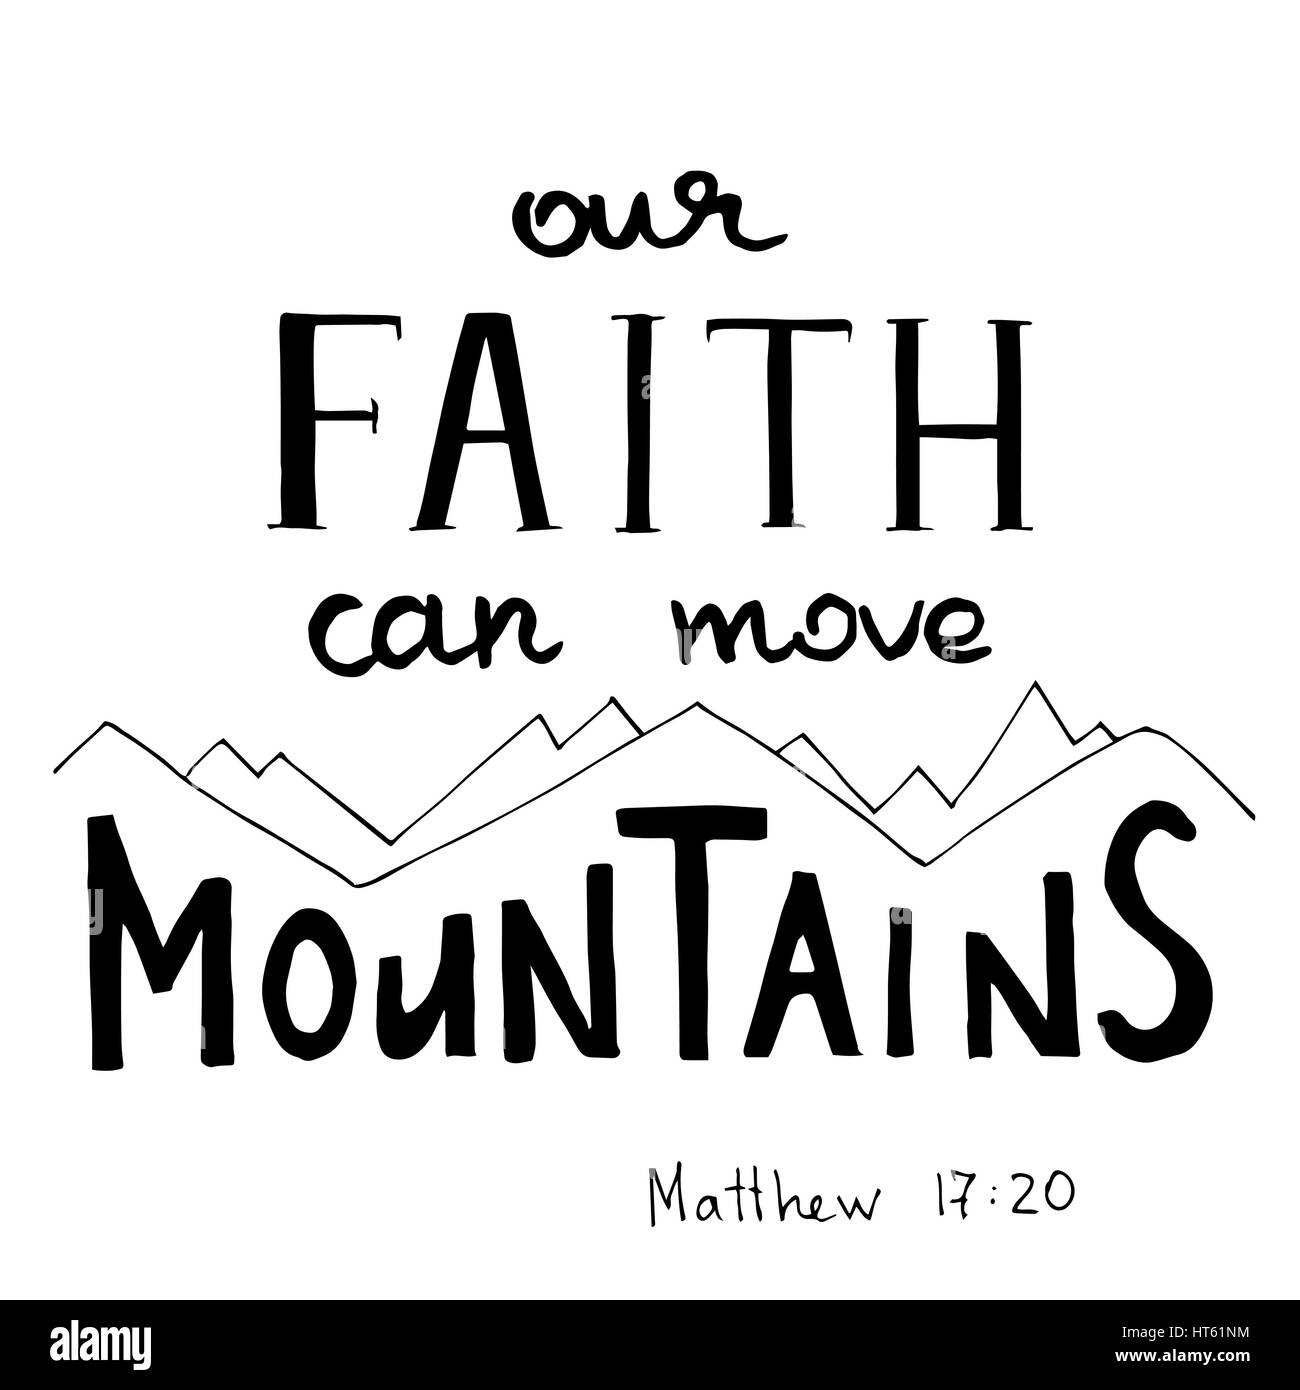 Our Faith can move Mountains. Hand written calligraphy. Rocky background. Hand drawn text. Christian motive. Vector illustration. Stock Vector